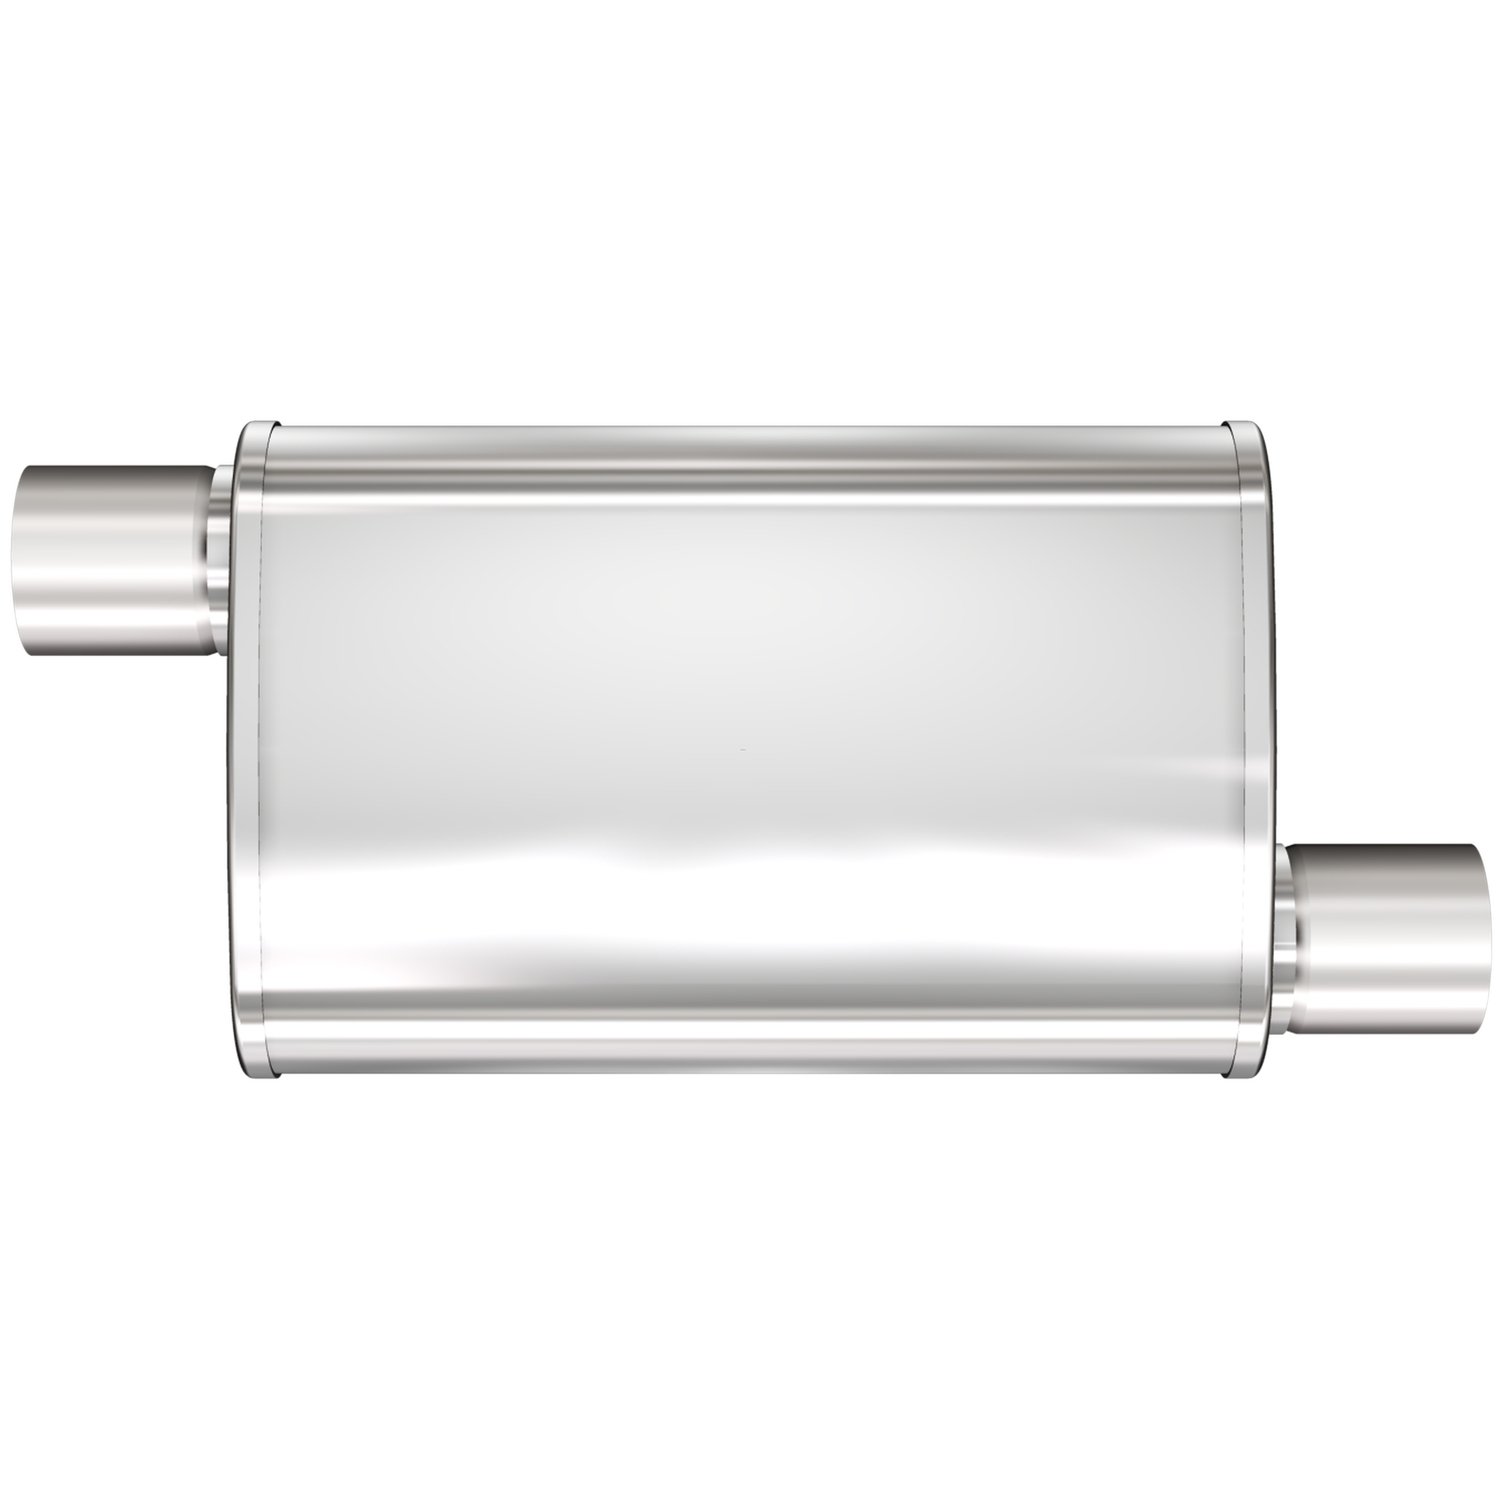 4" x 9" Oval XL 3-Chamber Muffler Offset In/Offset Out: 2.5"/2.5" Body Length: 14" Overall Length: 20" Satin Finish